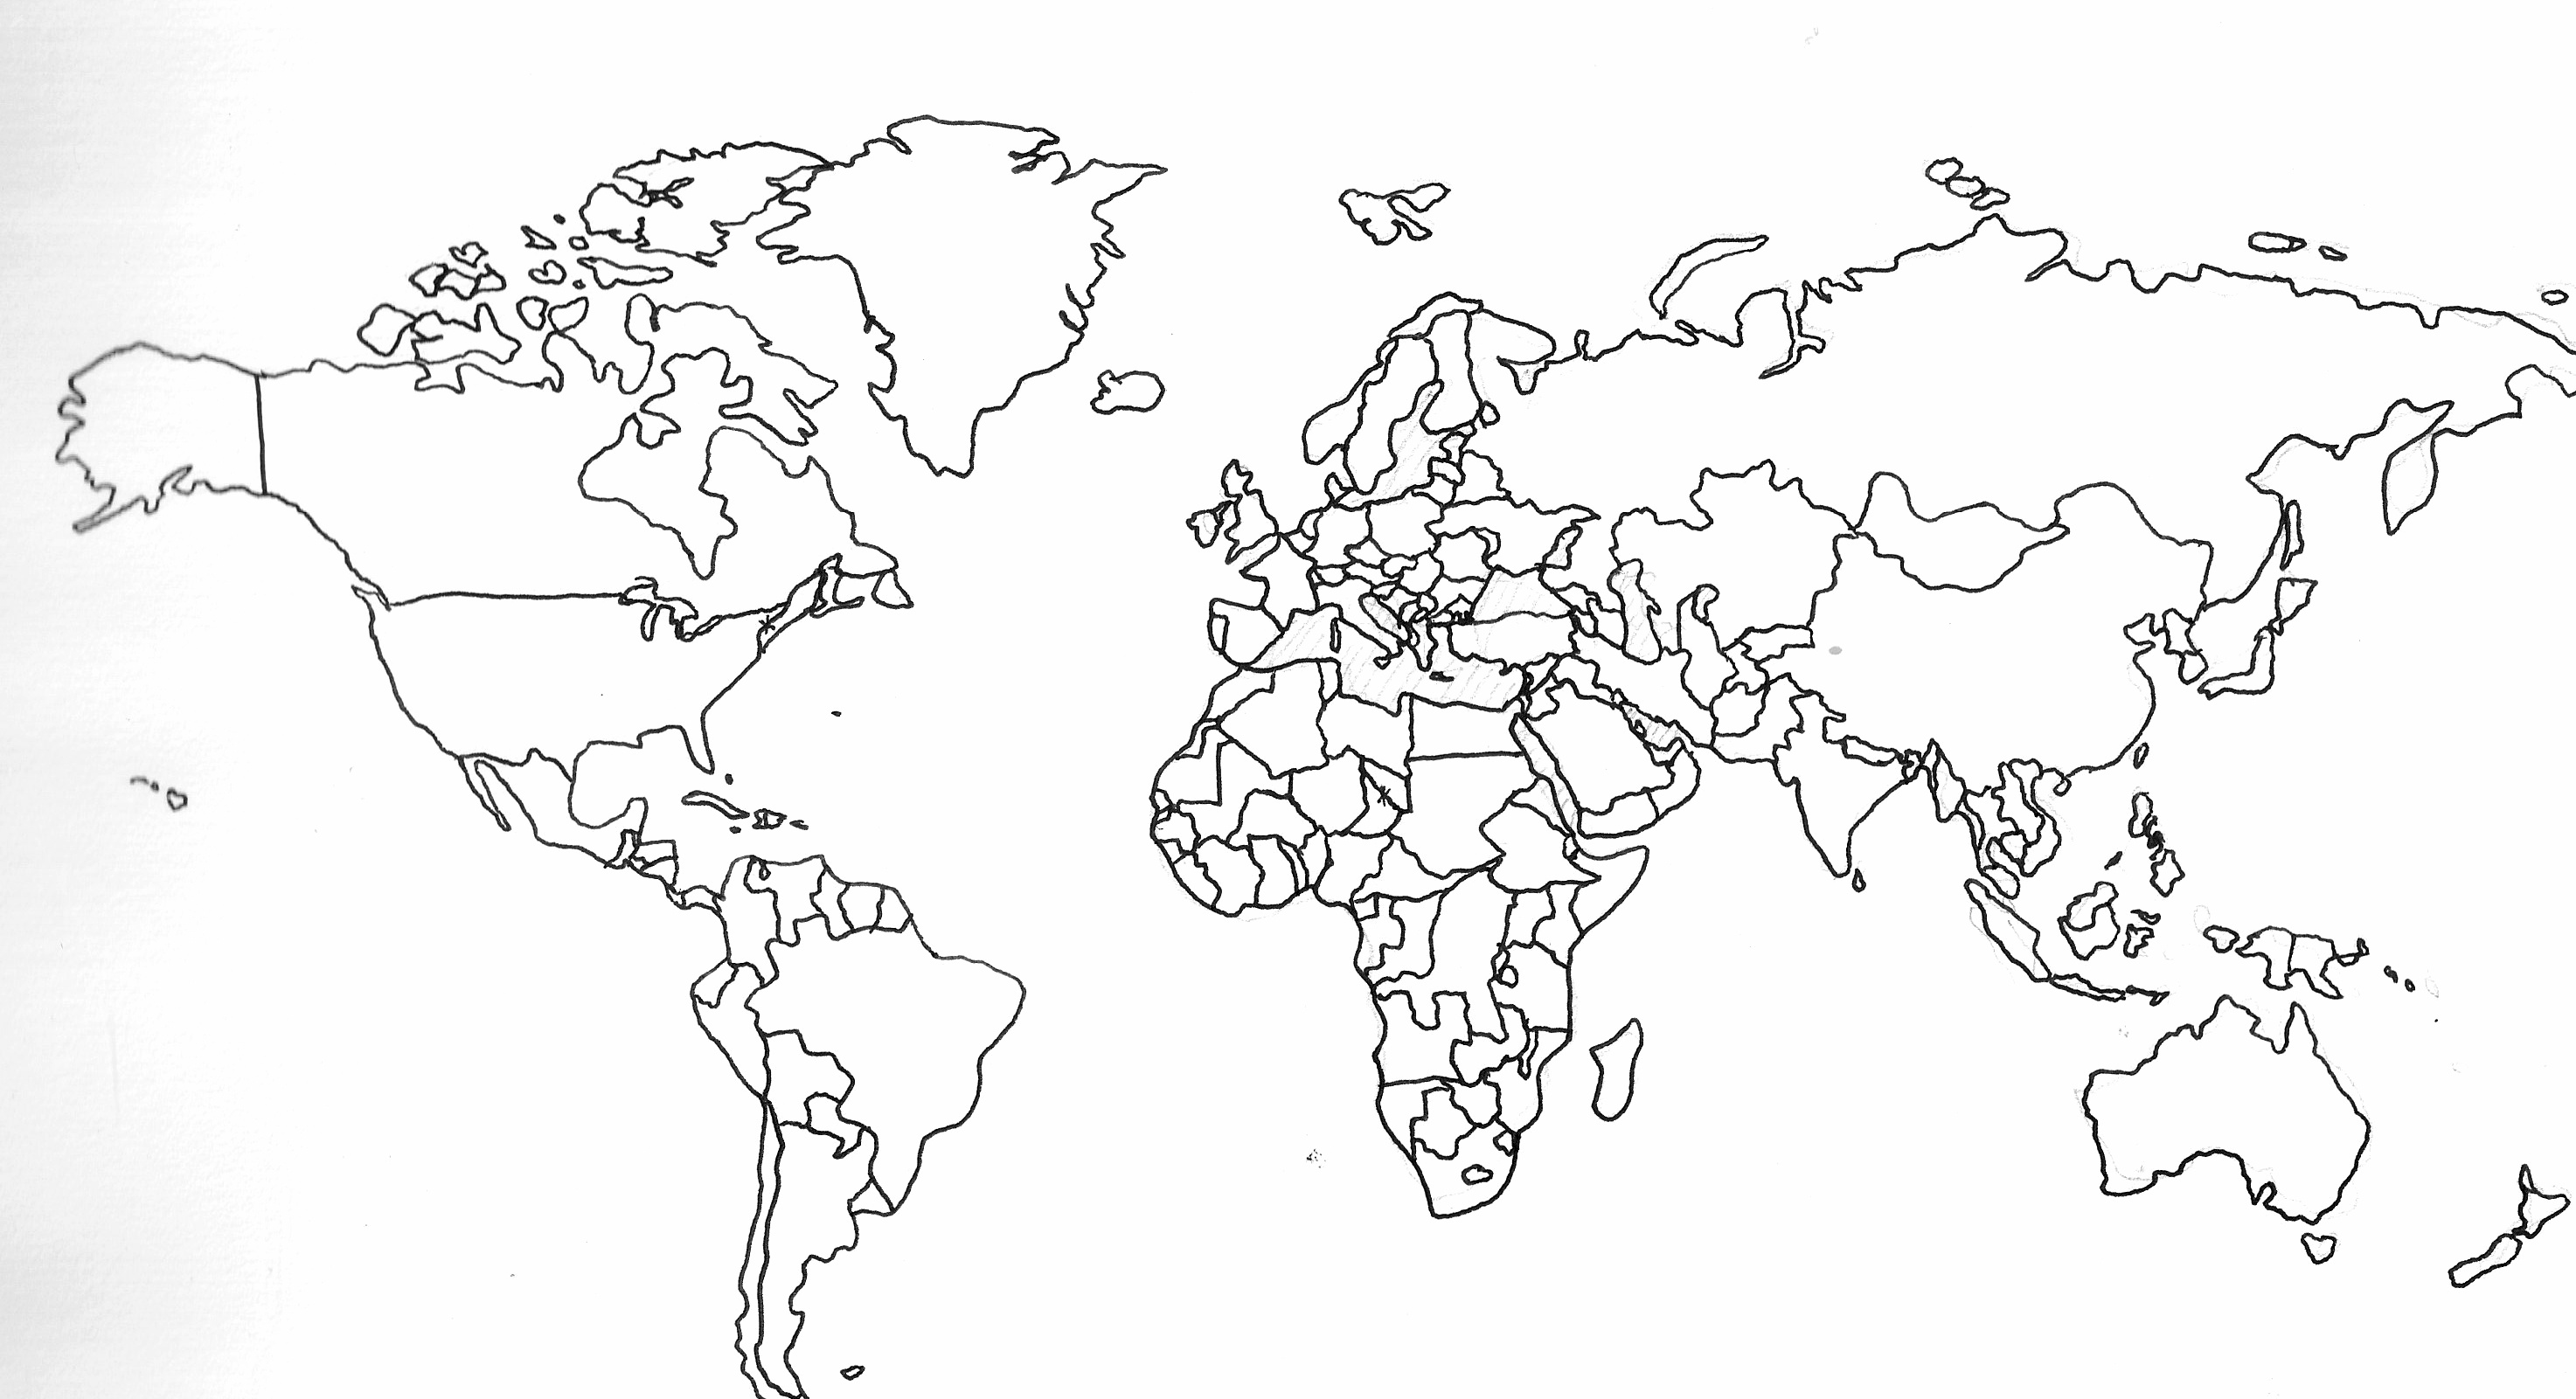 something-fun-countries-of-the-world-challenge-linking-to-thinking